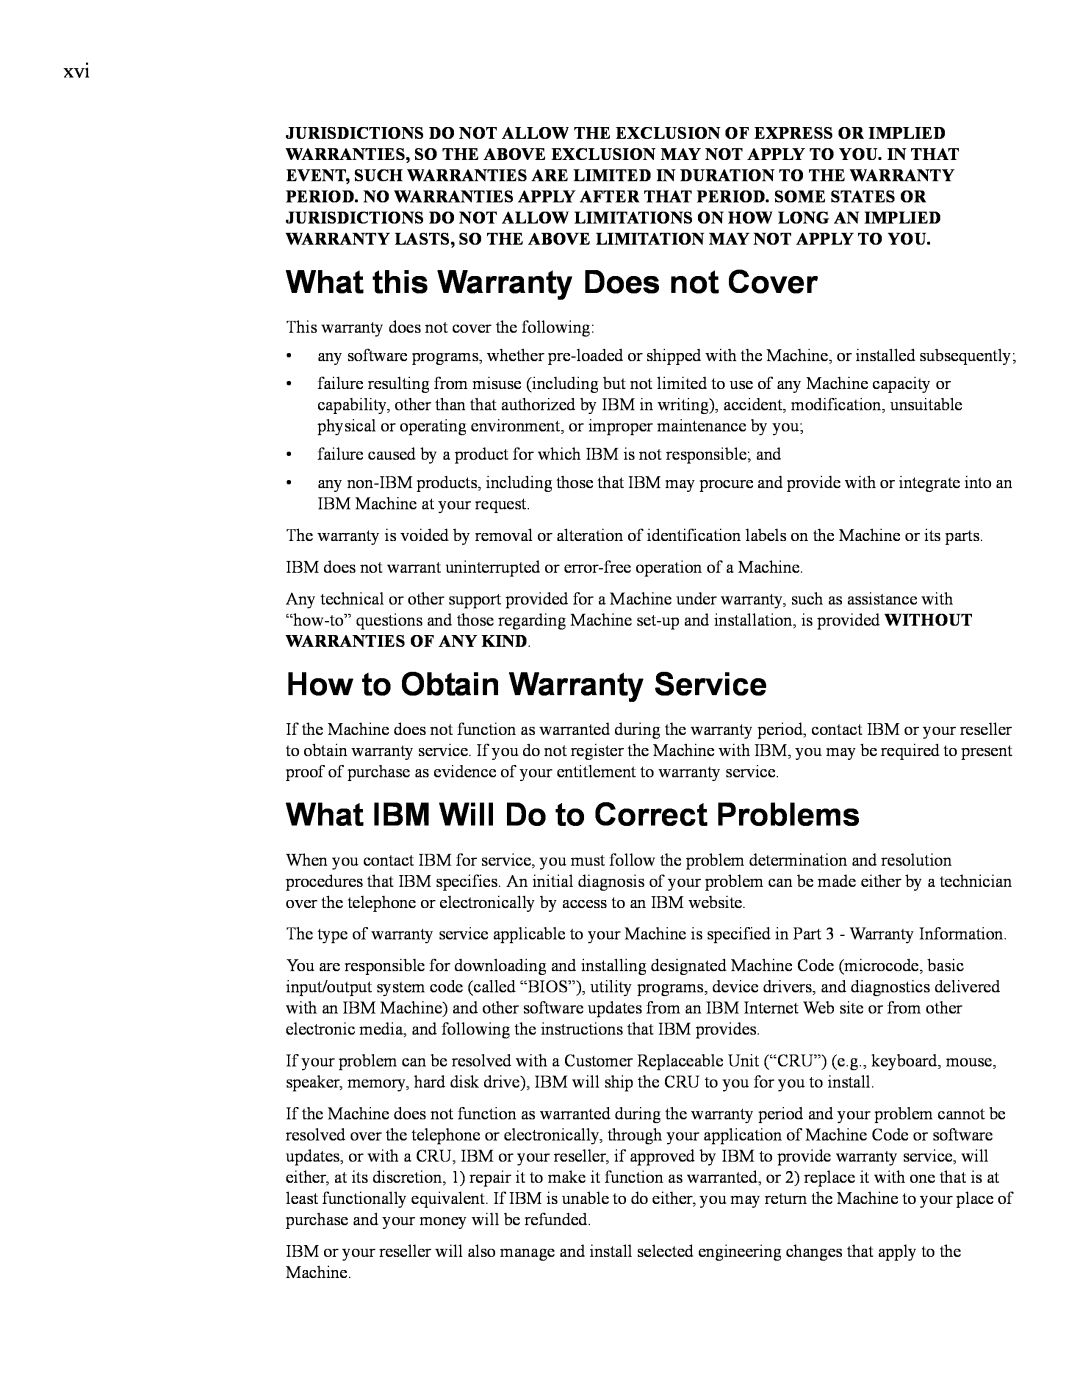 IBM 24R9718 IB What this Warranty Does not Cover, How to Obtain Warranty Service, What IBM Will Do to Correct Problems 